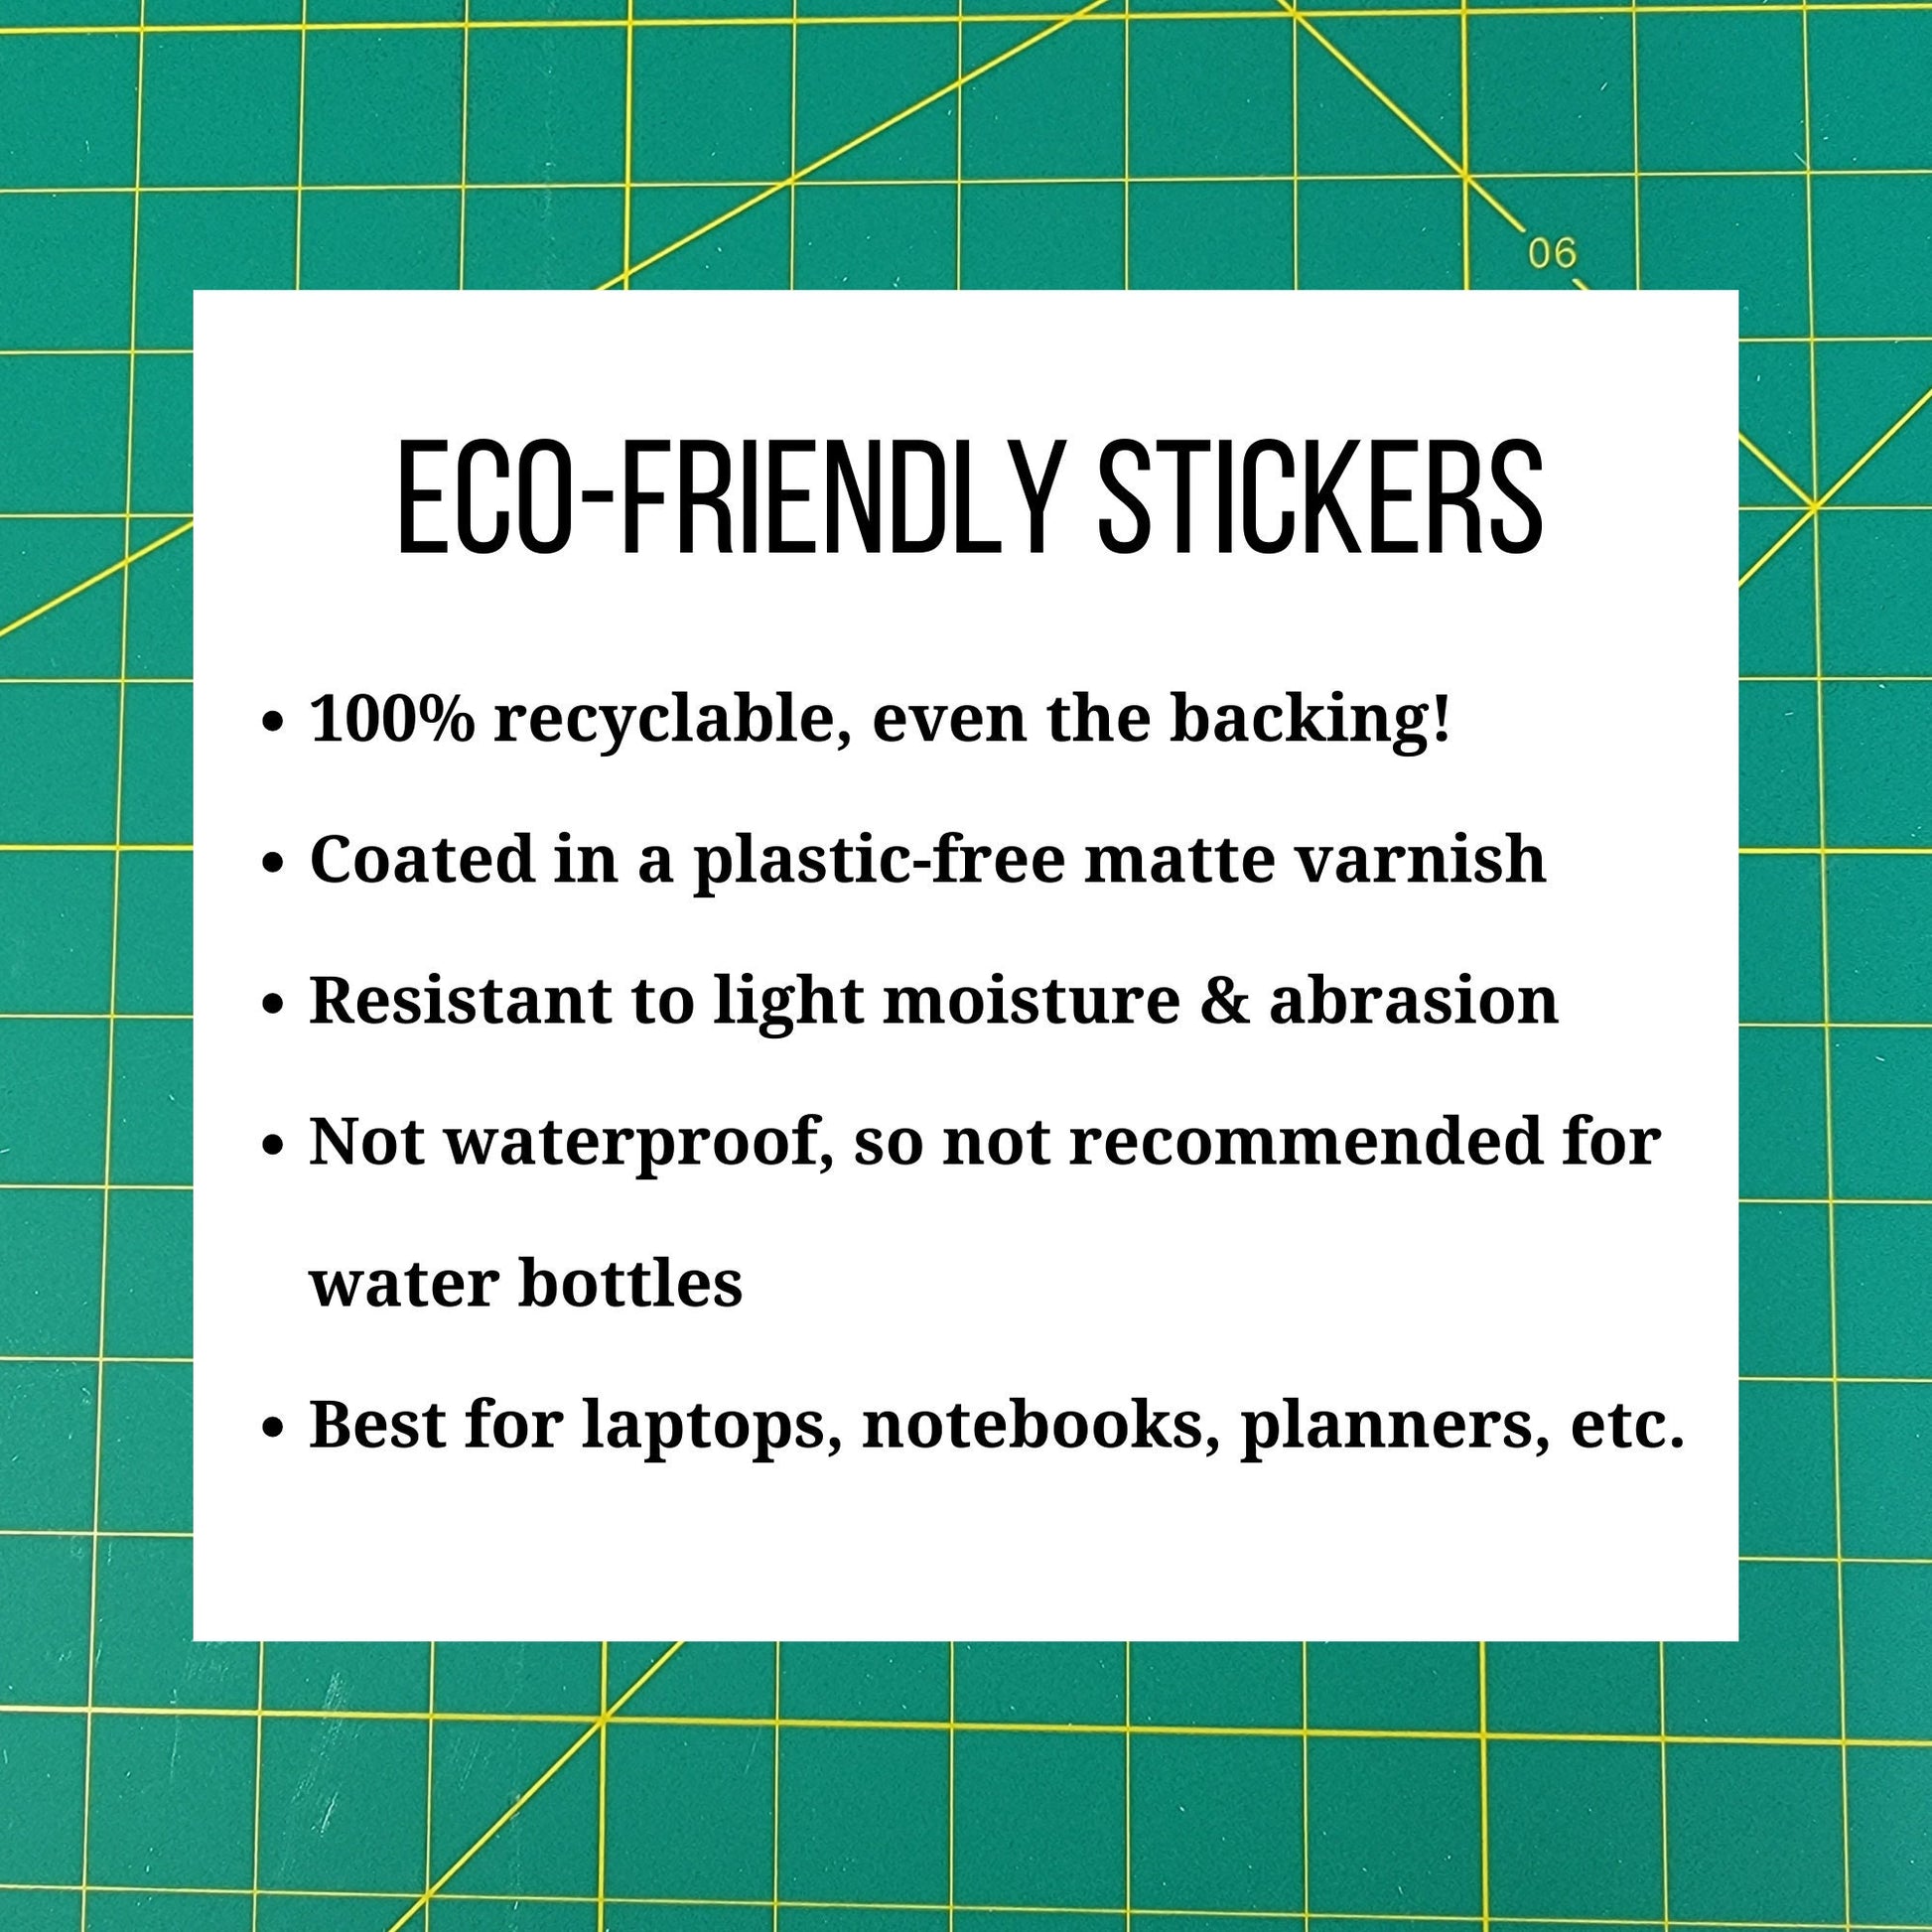 Eco-friendly stickers. 100% recyclable, even the backing. Coated in a plastic-free matte varnish. Resistant to light moisture and abrasion. Not waterproof, so not recommended for water bottles. Best for laptops, notebooks, planners, etc.